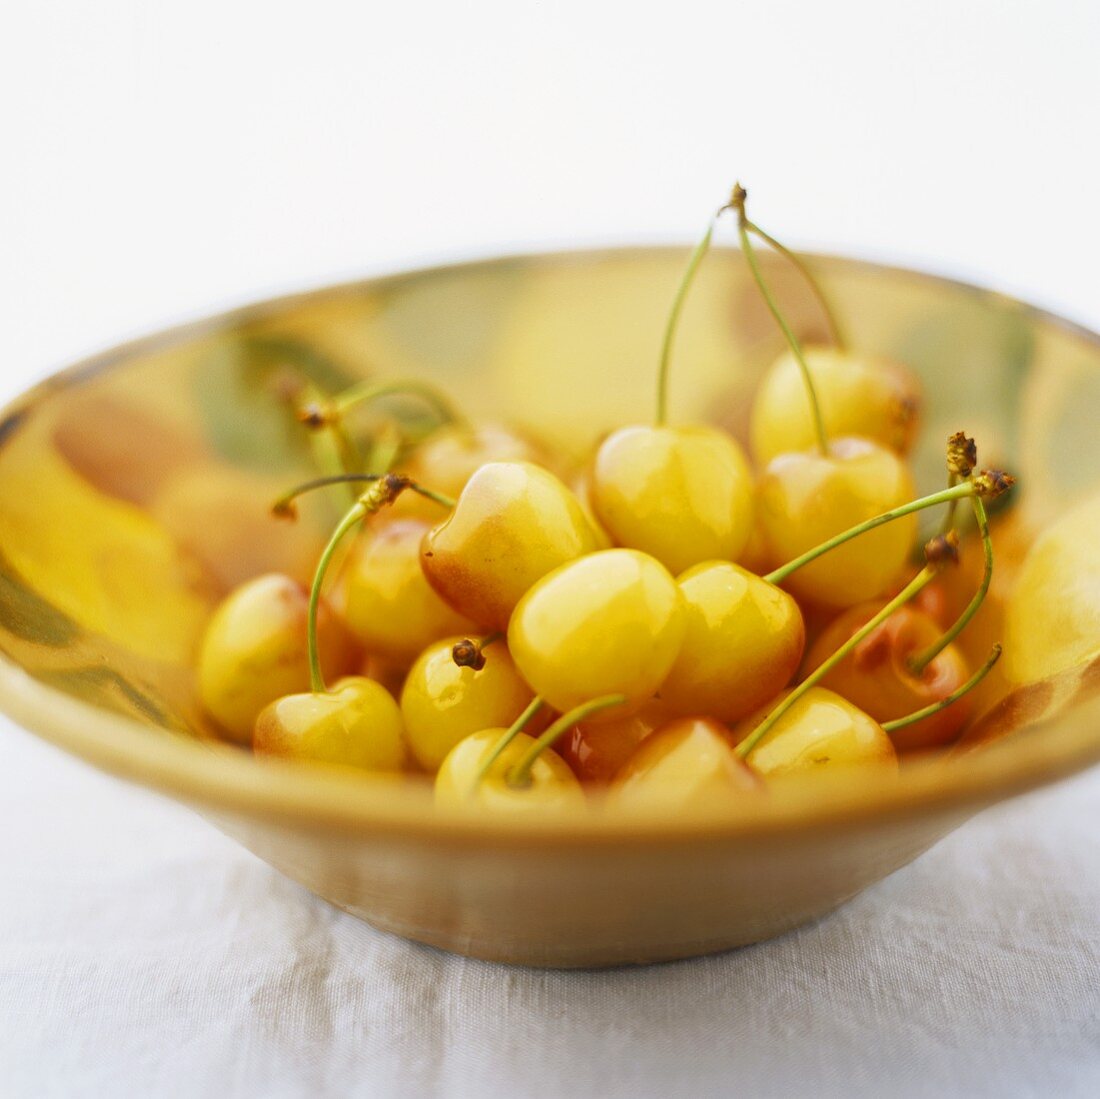 Yellow cherries in a bowl